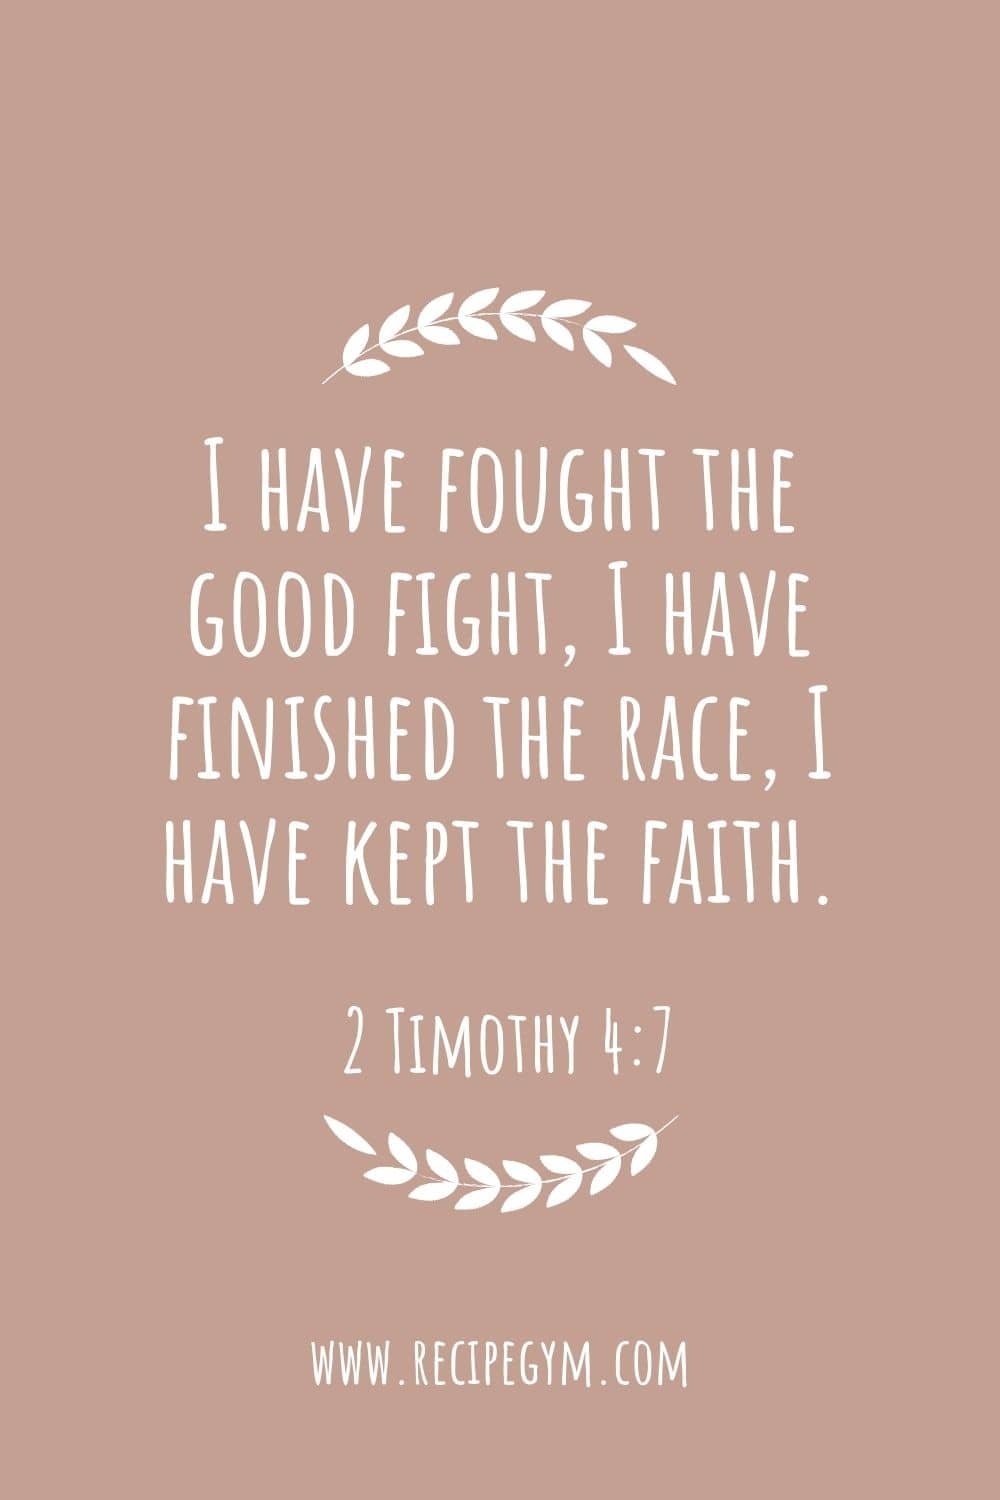 3R I have fought the good fight I have finished the race I have kept the faith